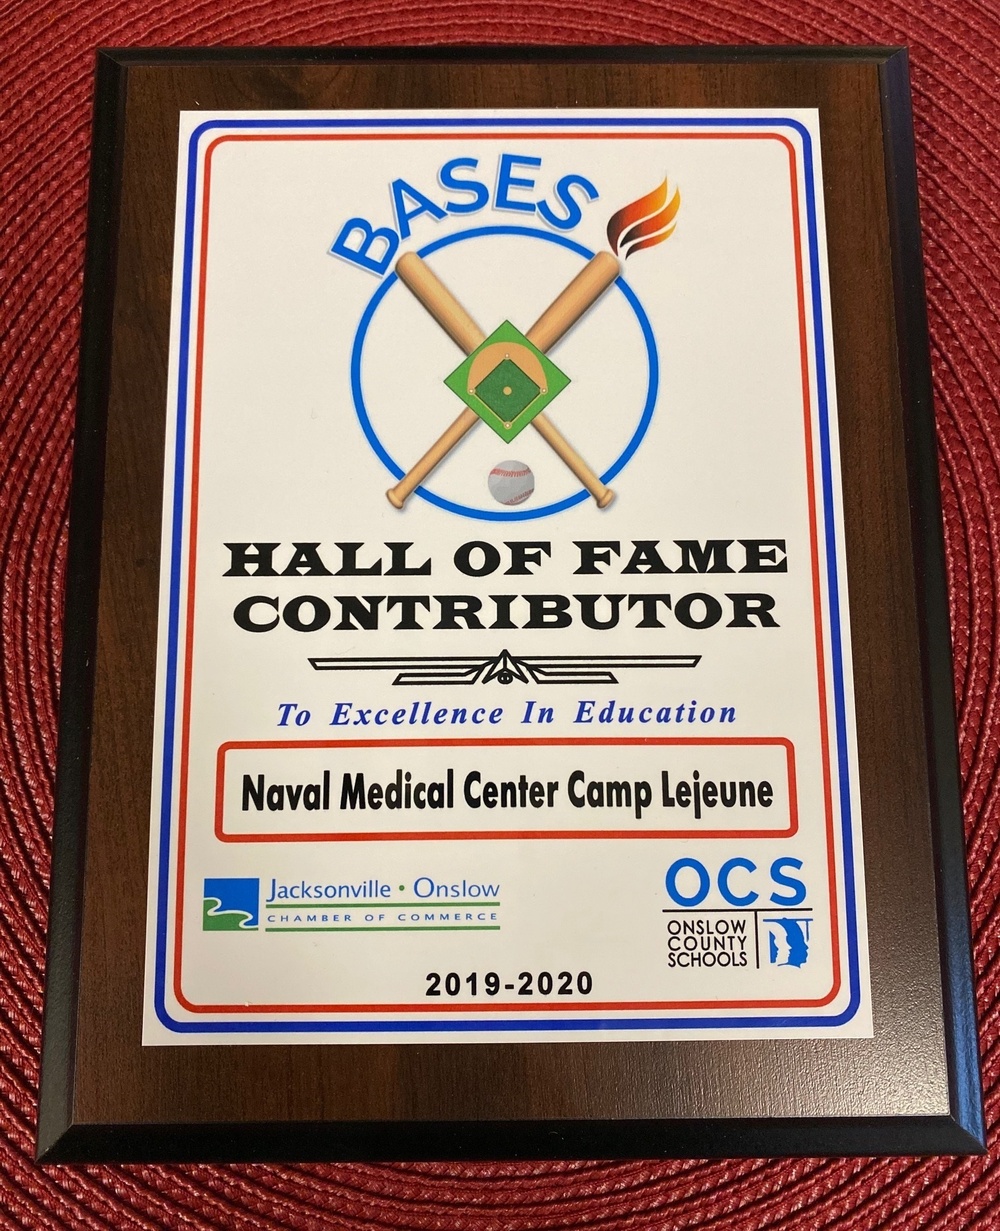 NMCCL Recognized as BASES Hall of Fame Contributor